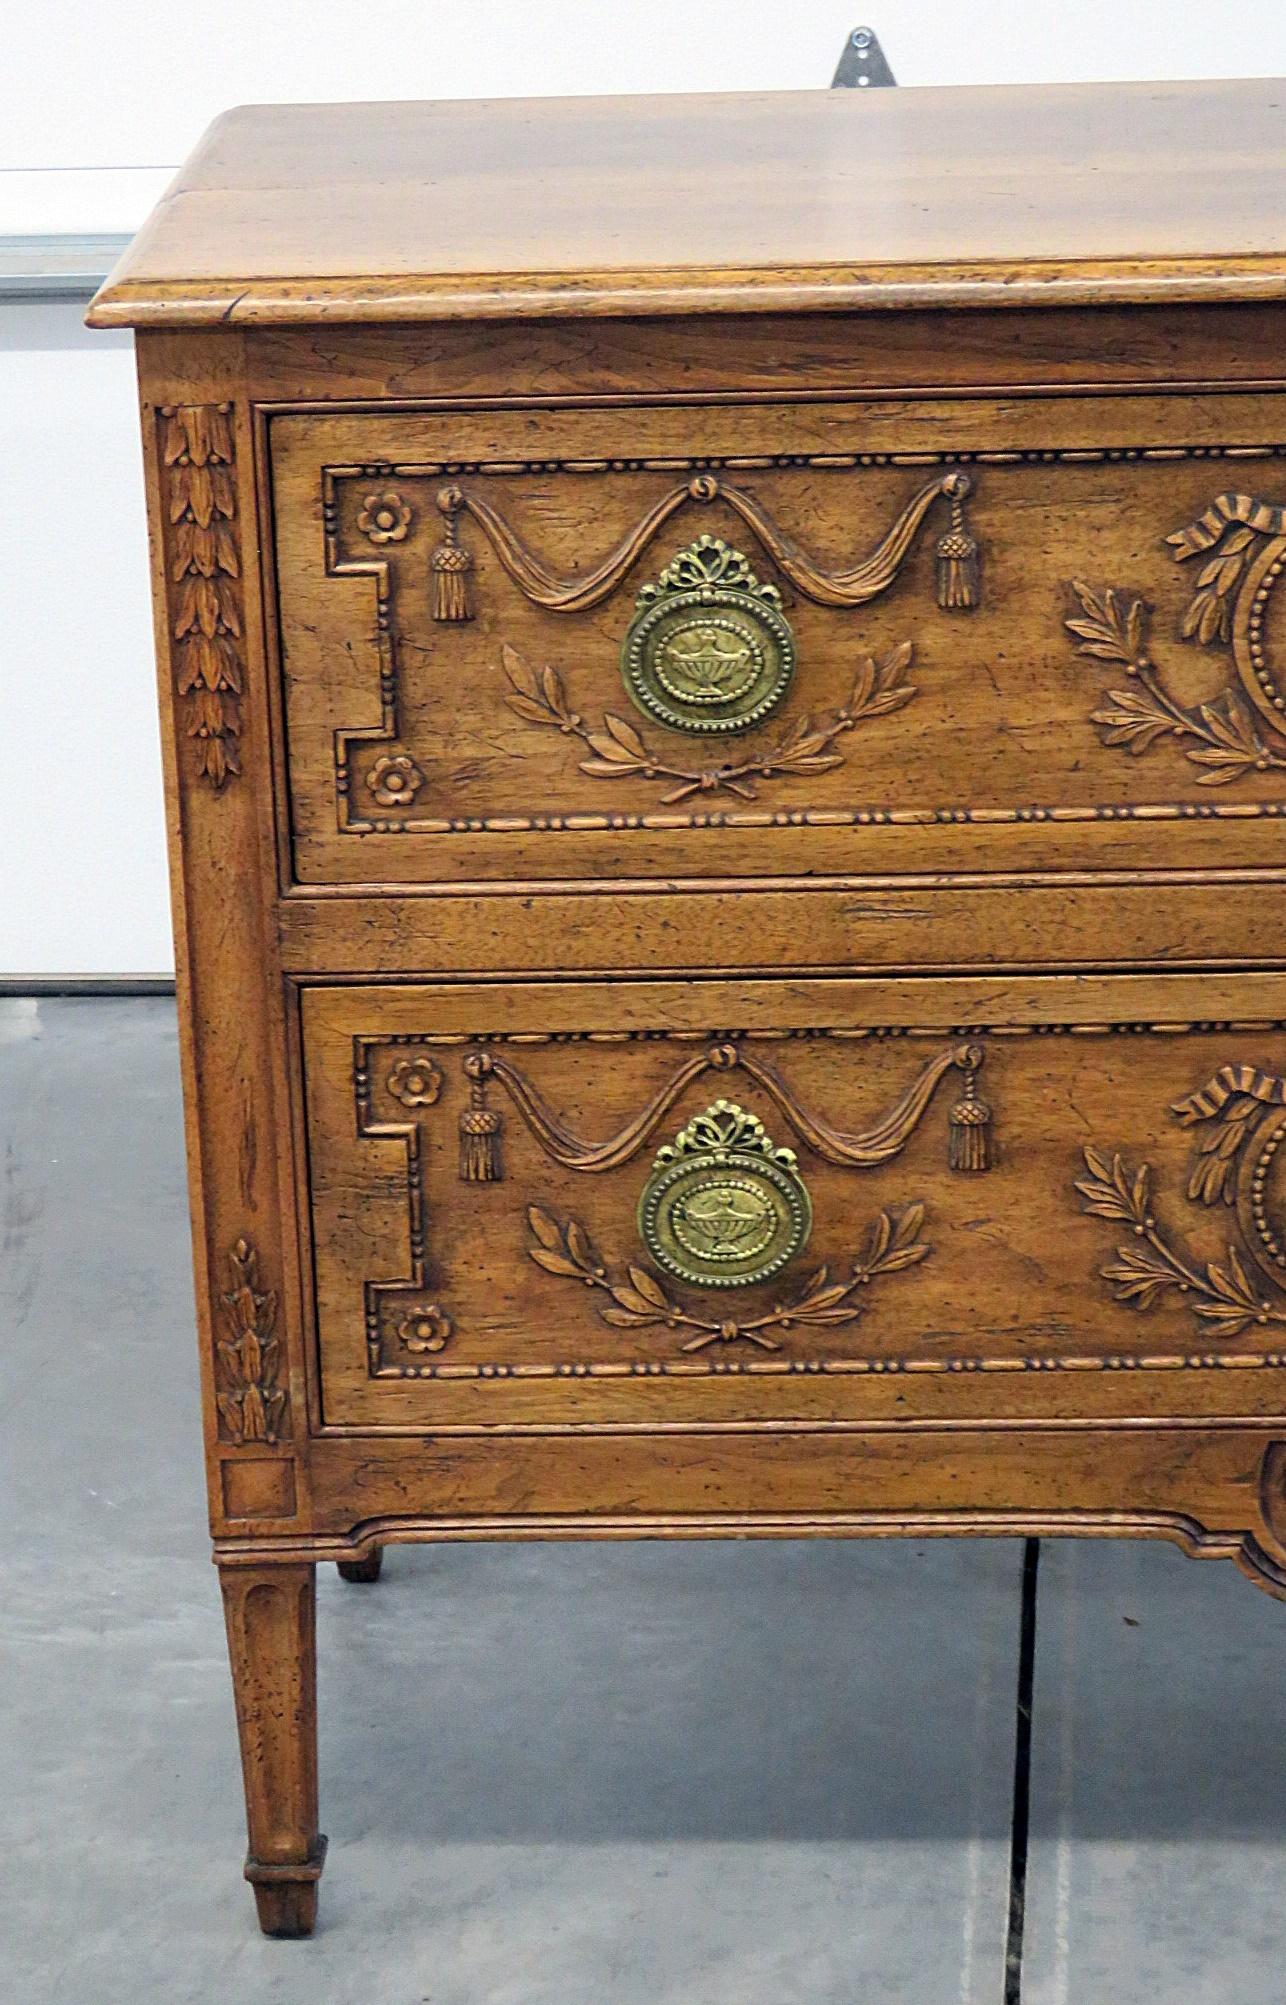 French Provincial style distressed finished 2-drawer commode with bronze hardware.